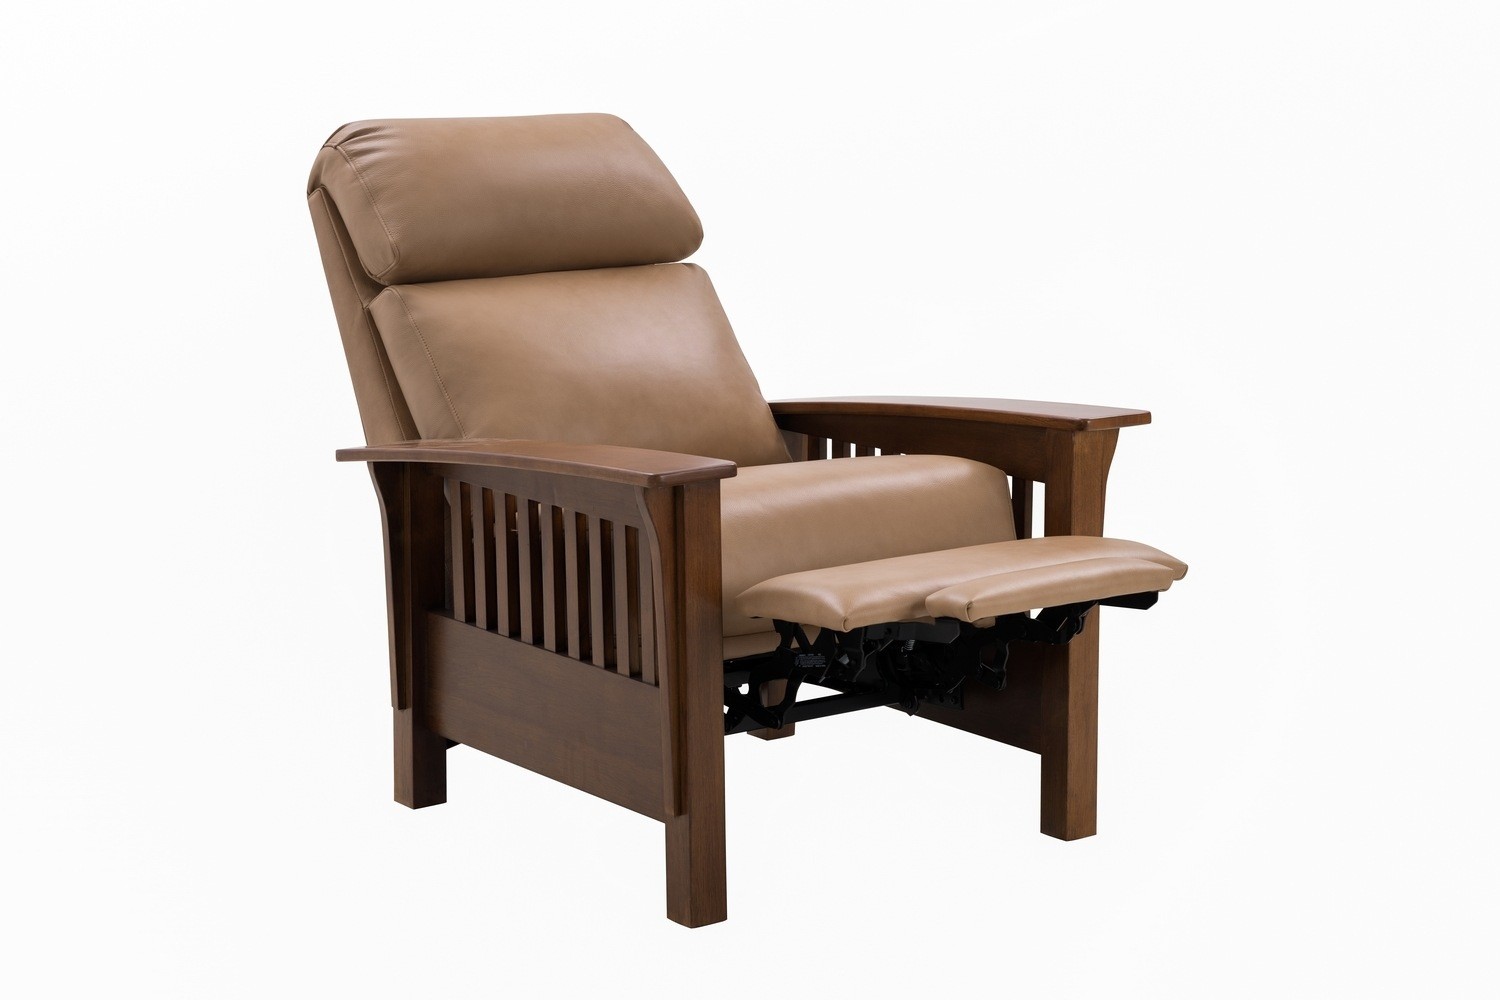 Barcalounger Mission Recliner Chair - Prestin Tuscan Sun/All Leather